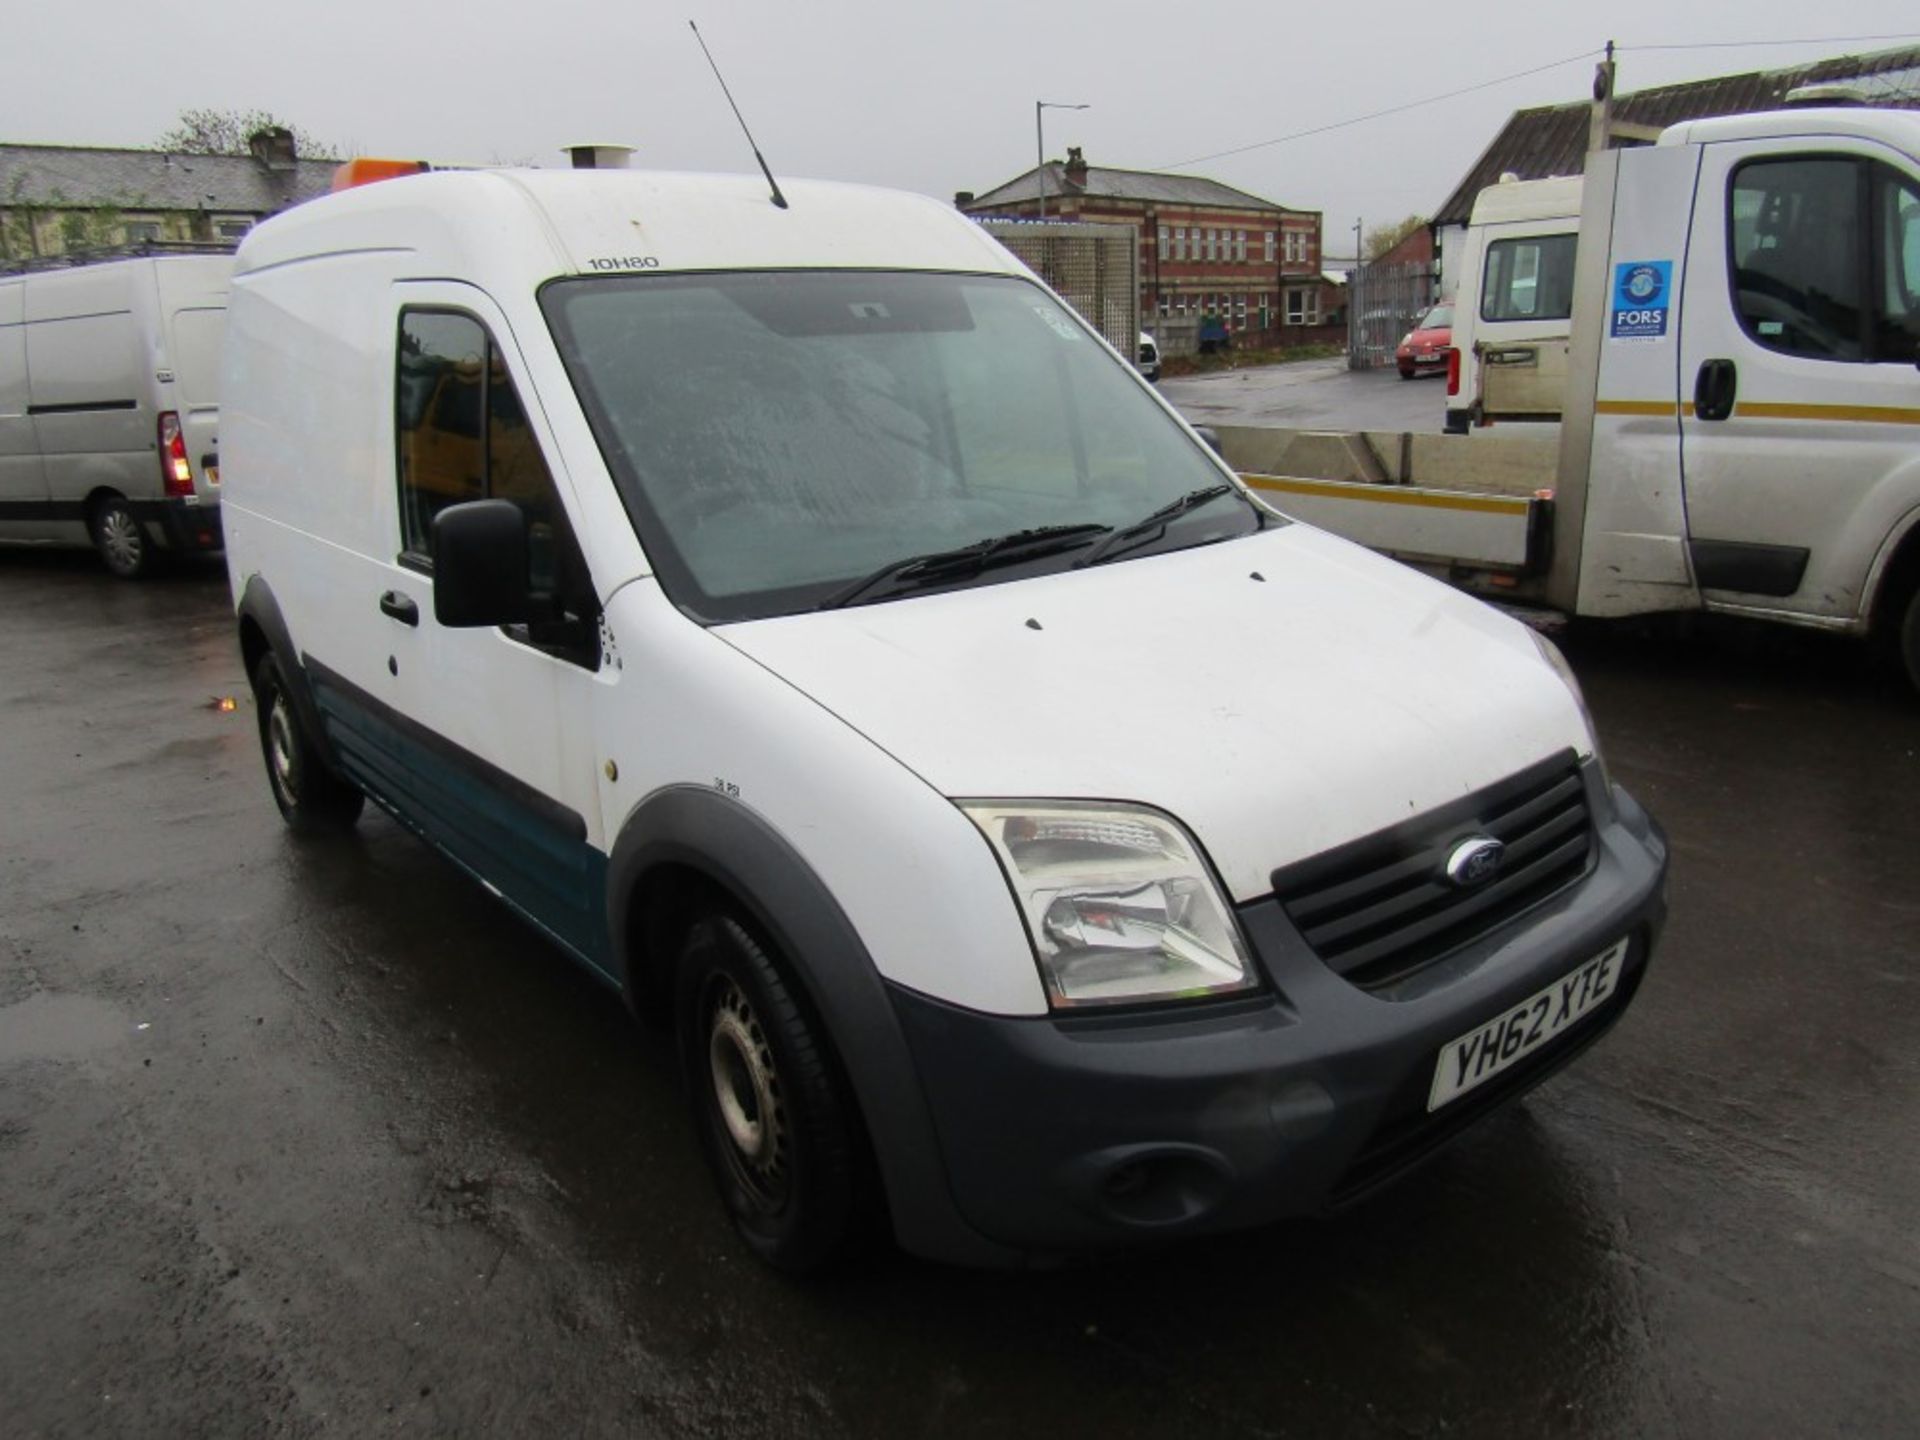 62 reg FORD TRANSIT CONNECT 90 T230 (DIRECT UNITED UTILITIES WATER) 1ST REG 11/12, 156024M, V5 MAY